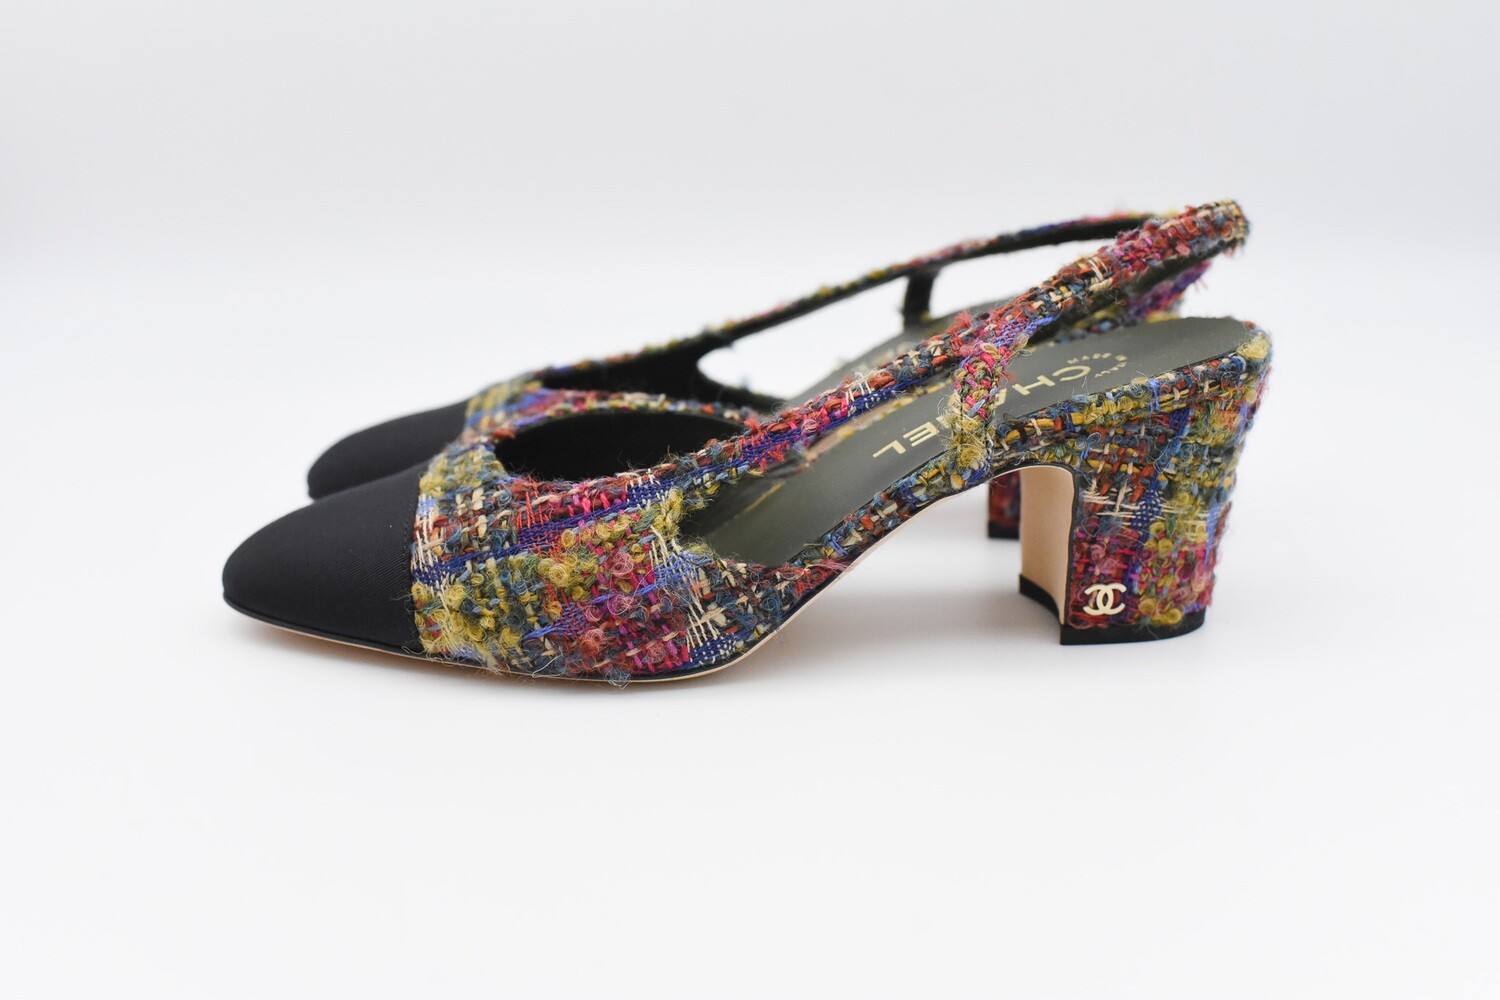 Chanel Shoes Tweed Slingbacks, Multicolor, Size 40, New in Box GA006